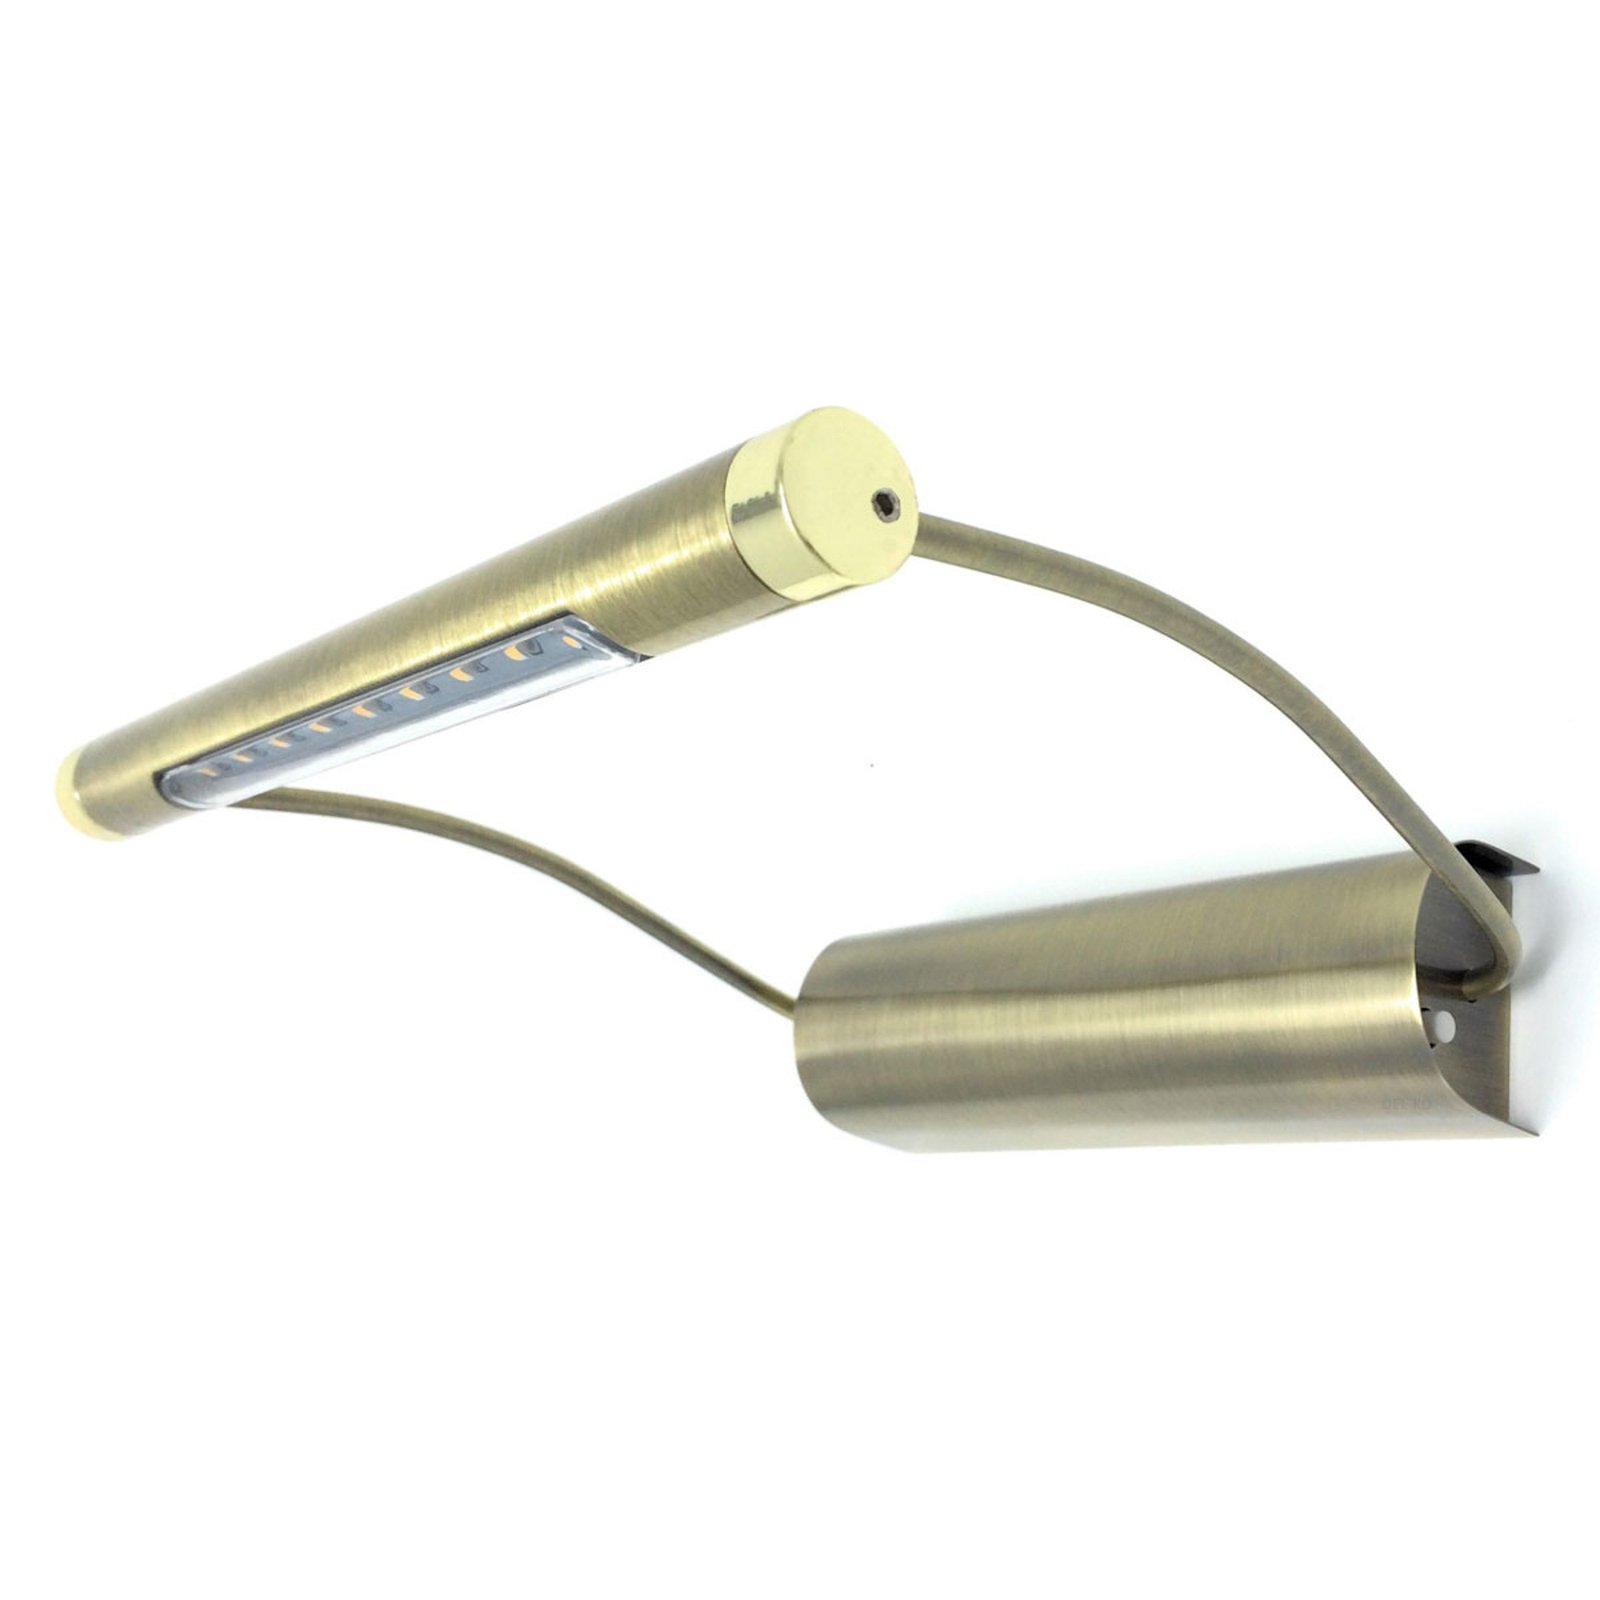 Tommy LED picture light, brass-coloured, battery-operated